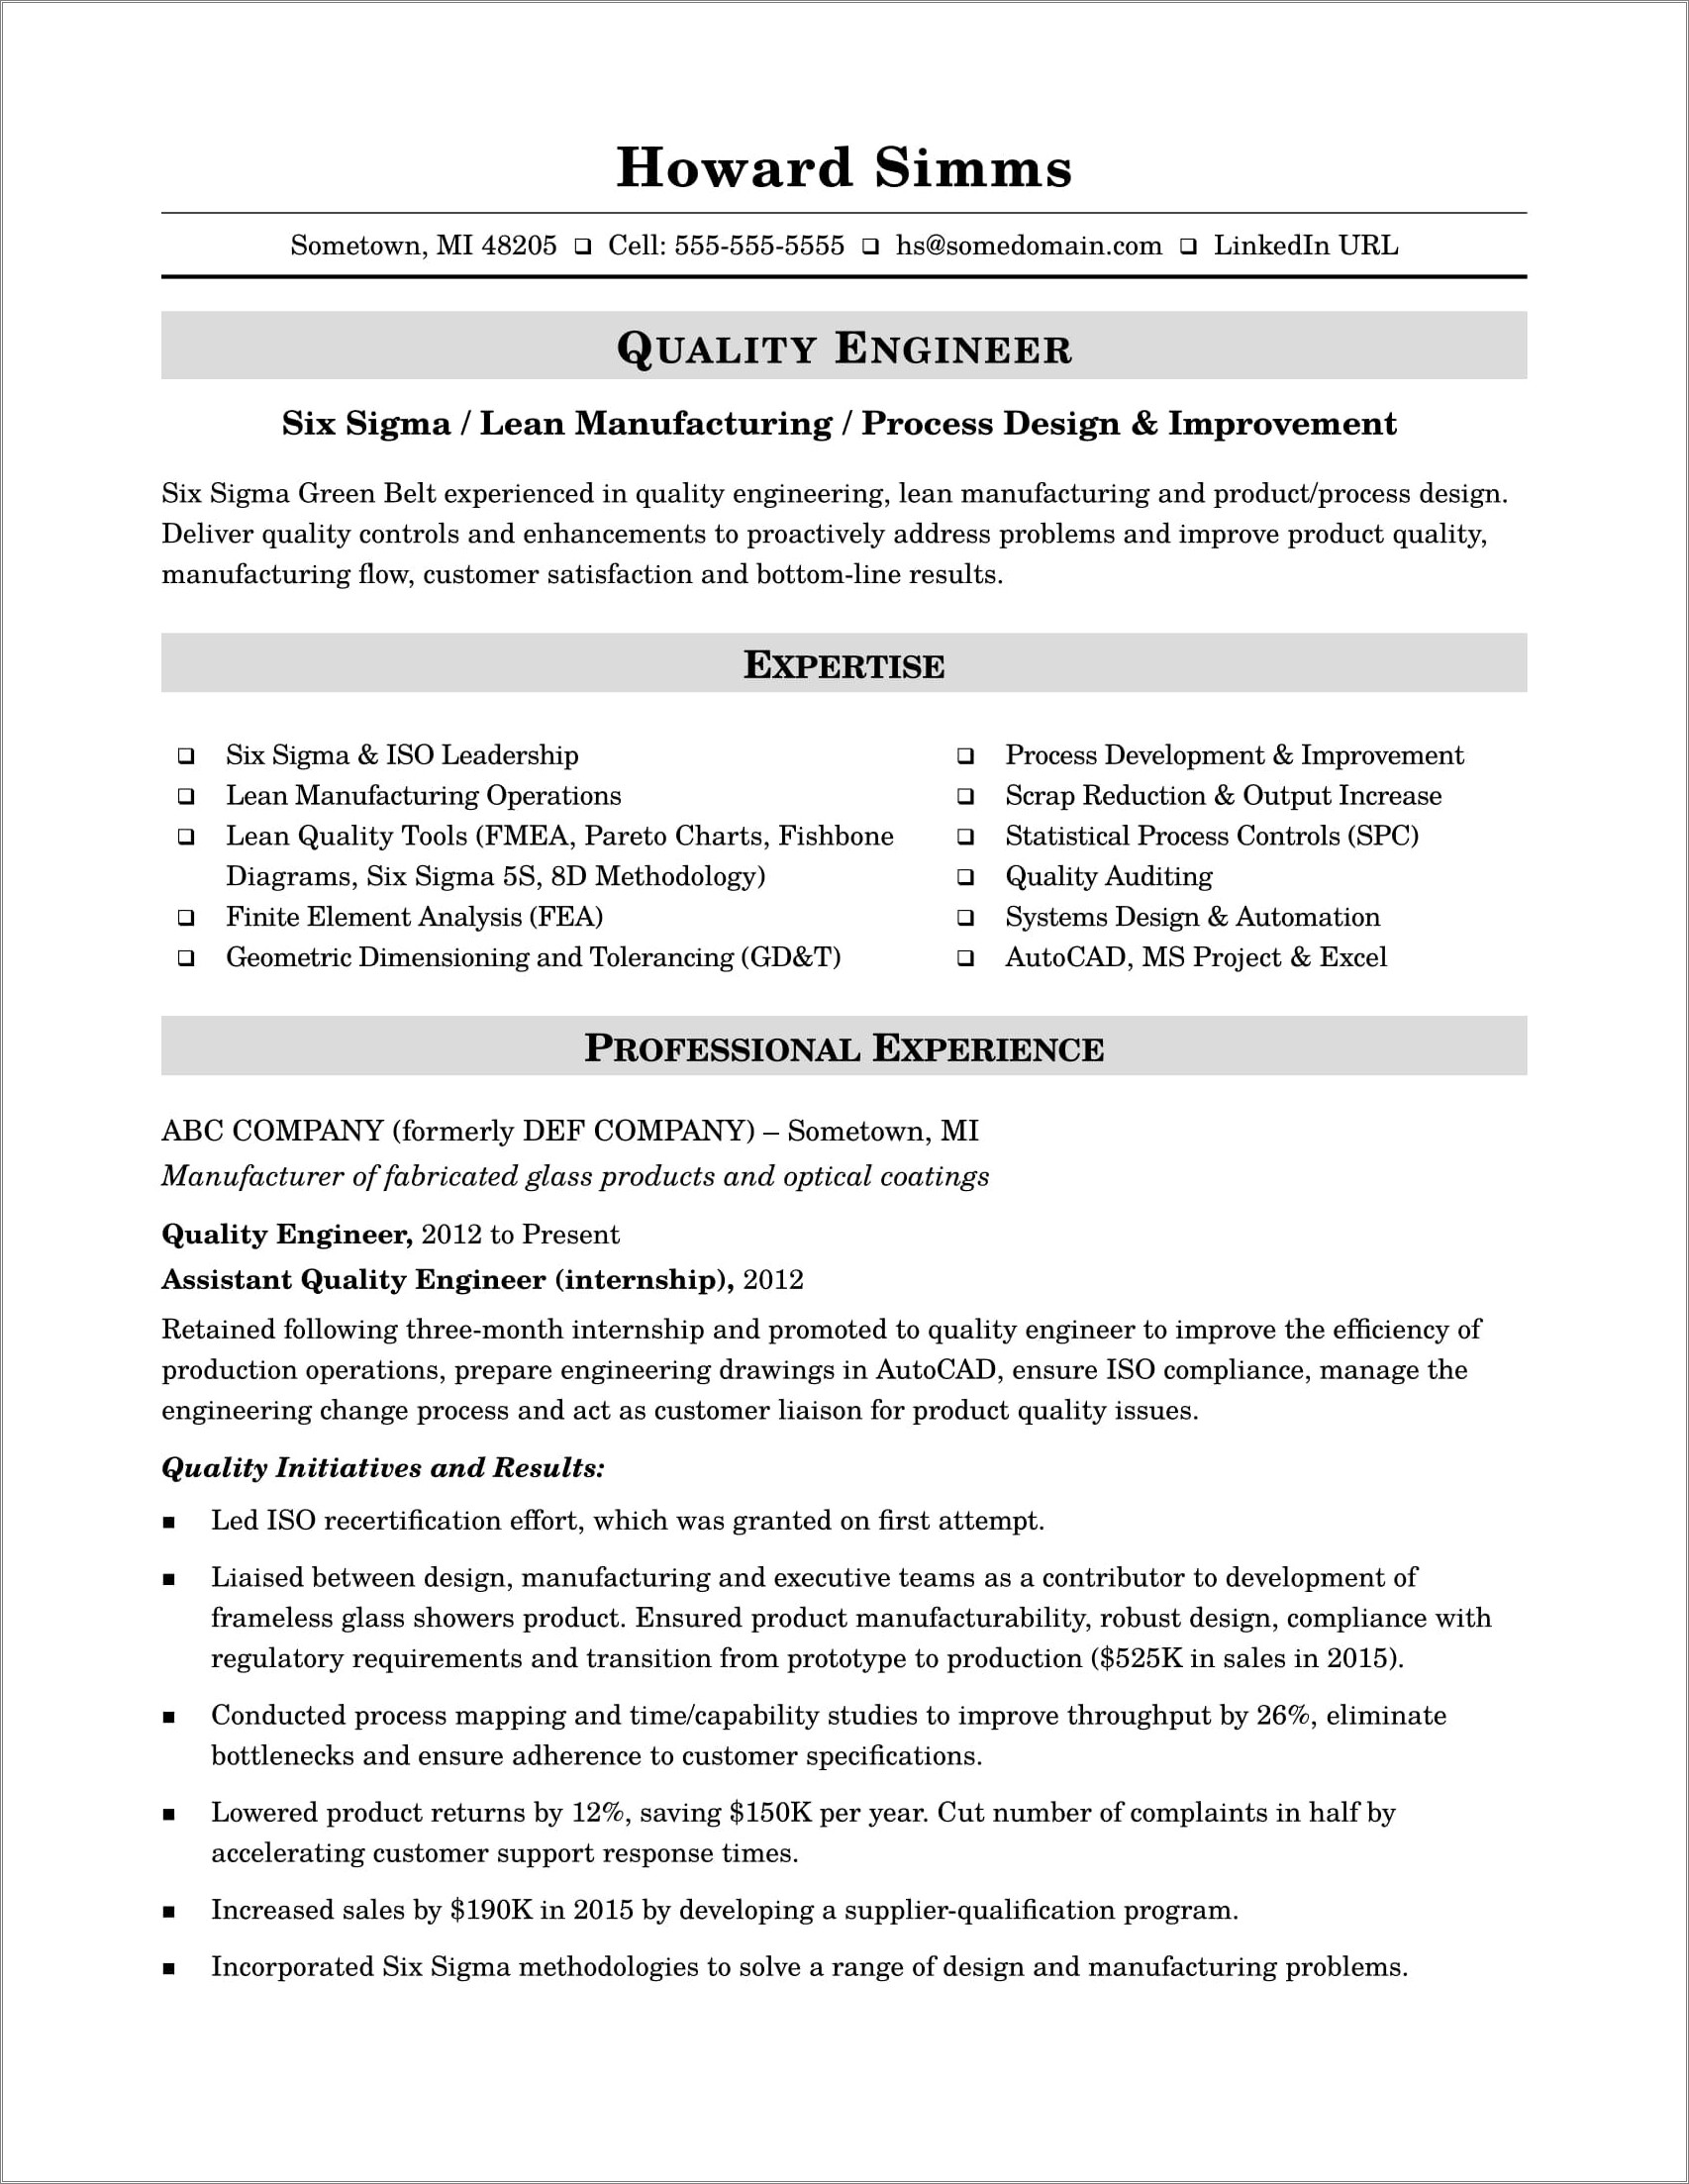 Resume Objective For Entry Level Manufacturing